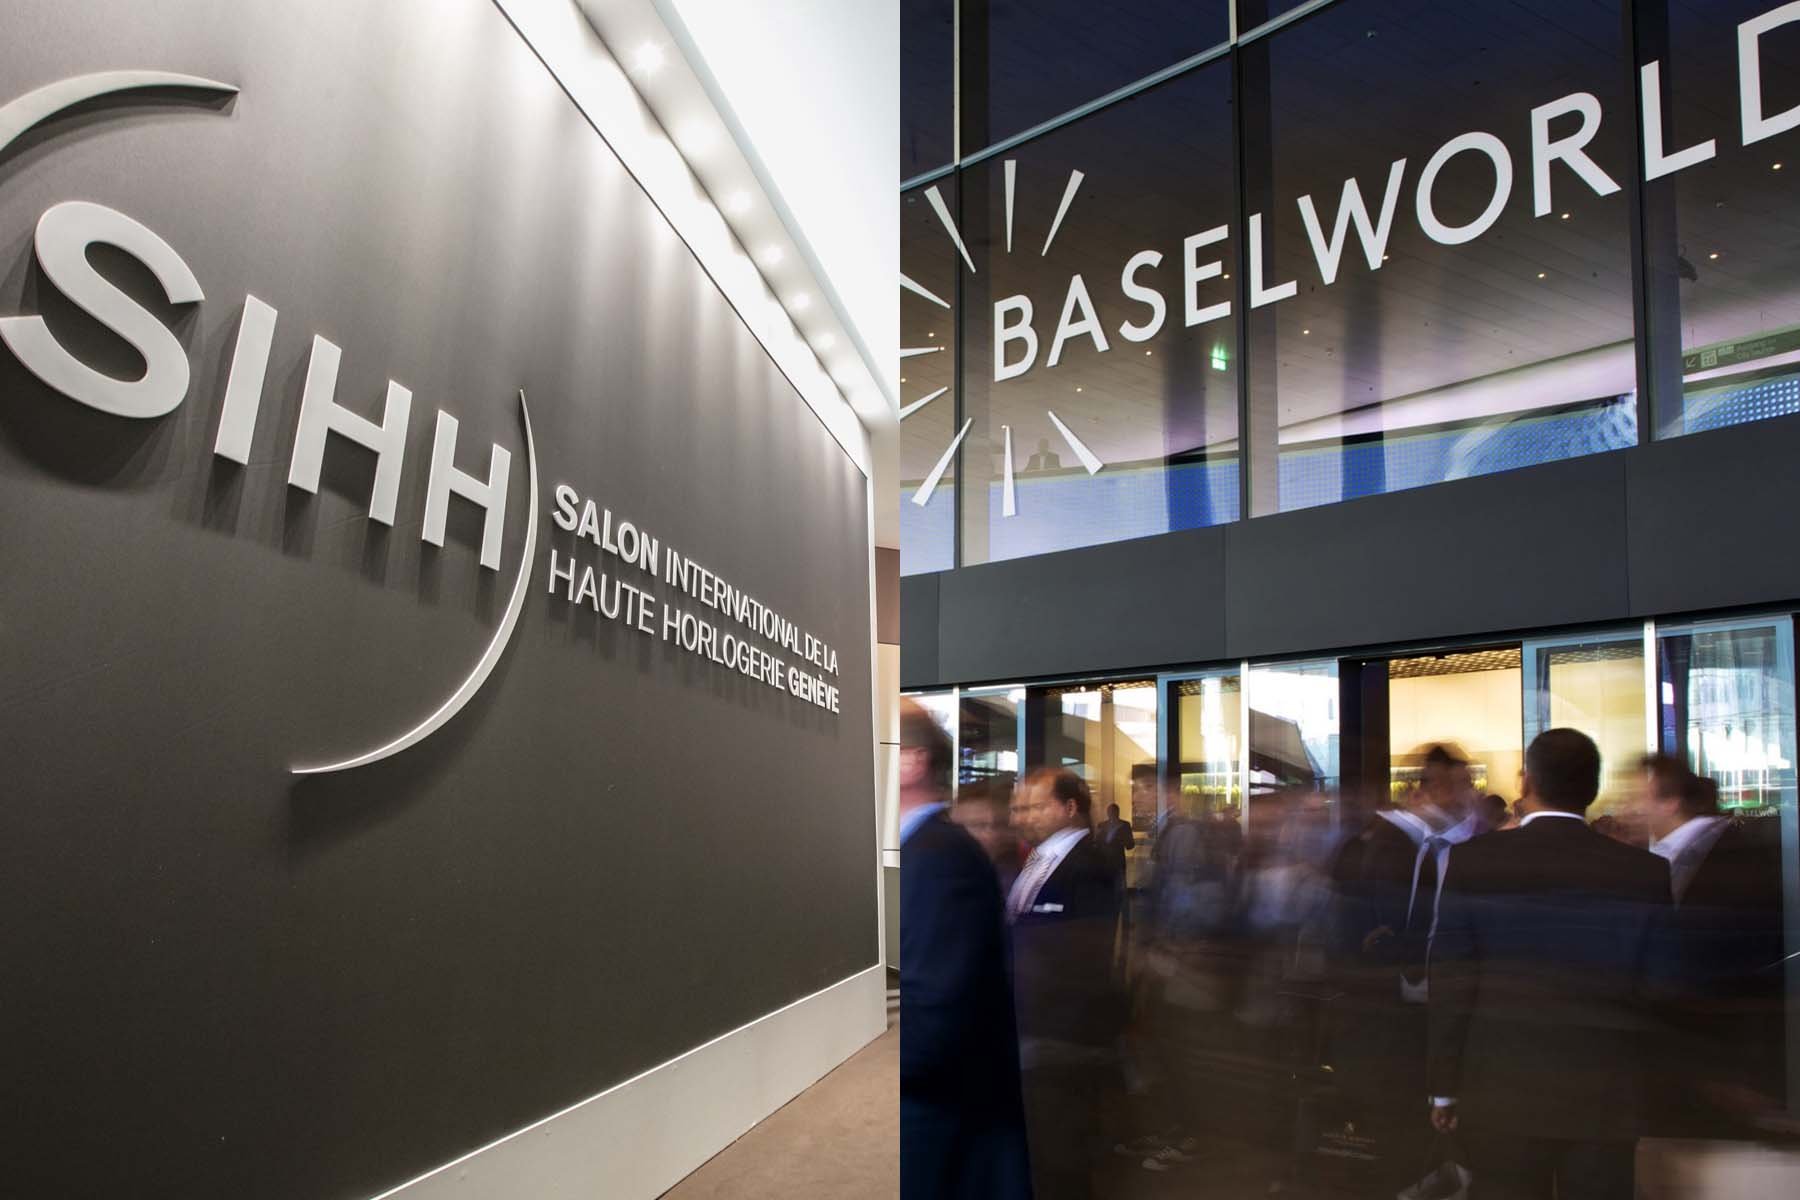 SIHH-And-Baselworld-To-Coordinate-Their-Dates-From-2020.jpg